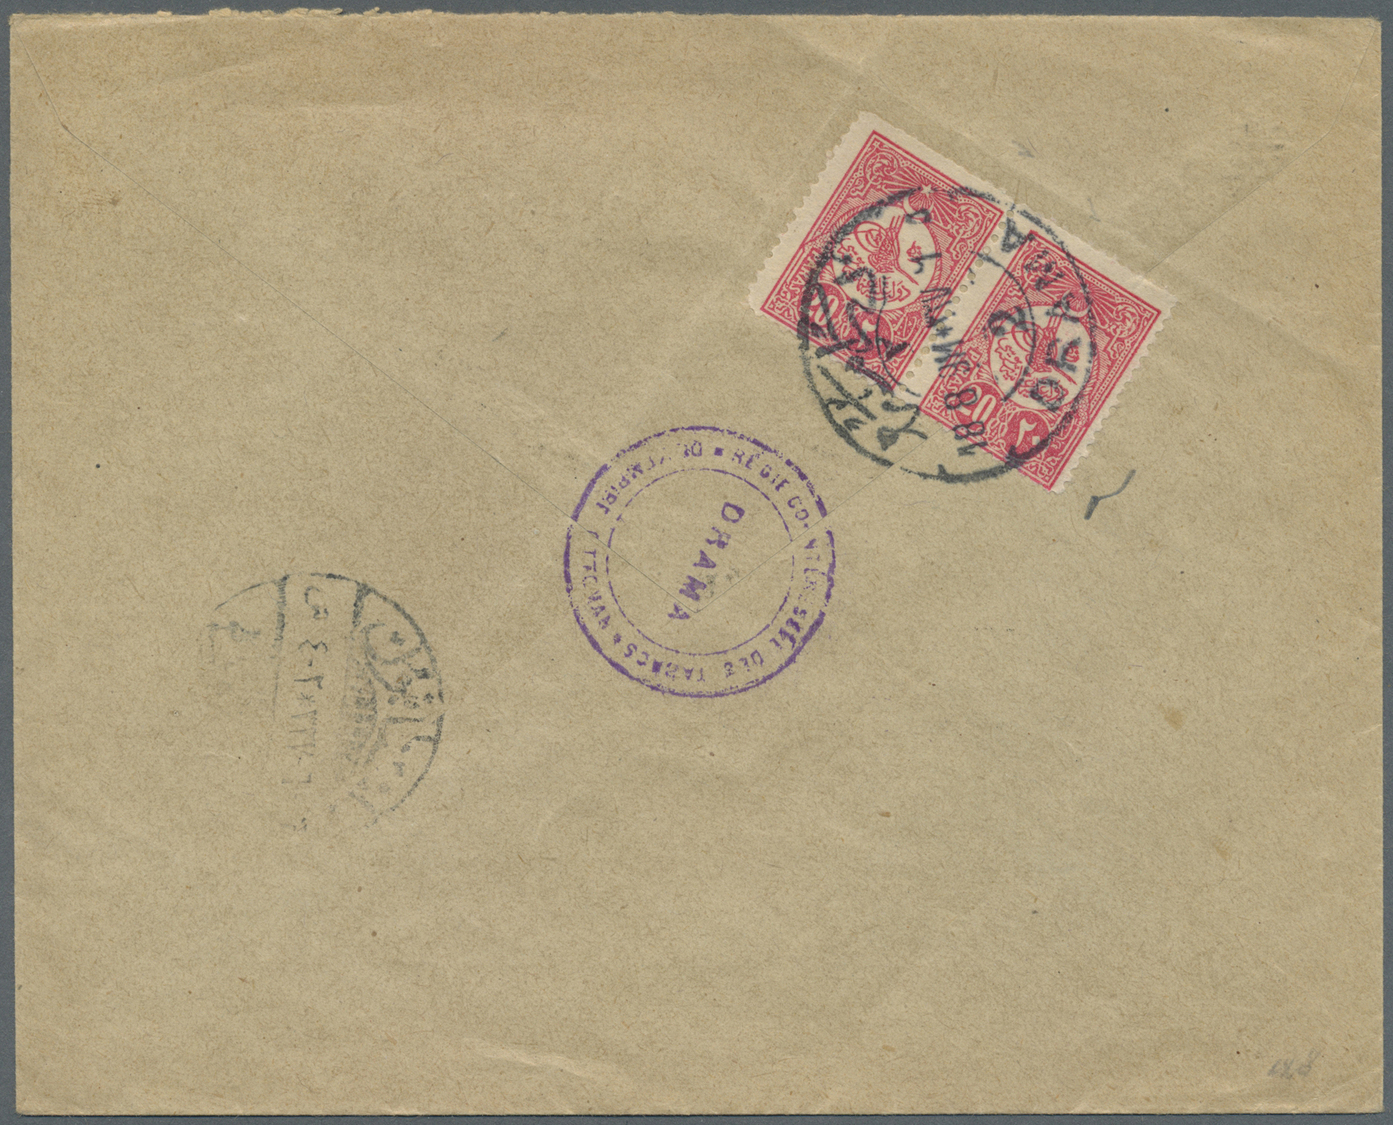 Br Griechenland - Stempel: DRAMA, Turkish Bilingual C.d.s. 18.8.1911, Clear Strike On Commercial Cover To Constan - Marcophilie - EMA (Empreintes Machines)